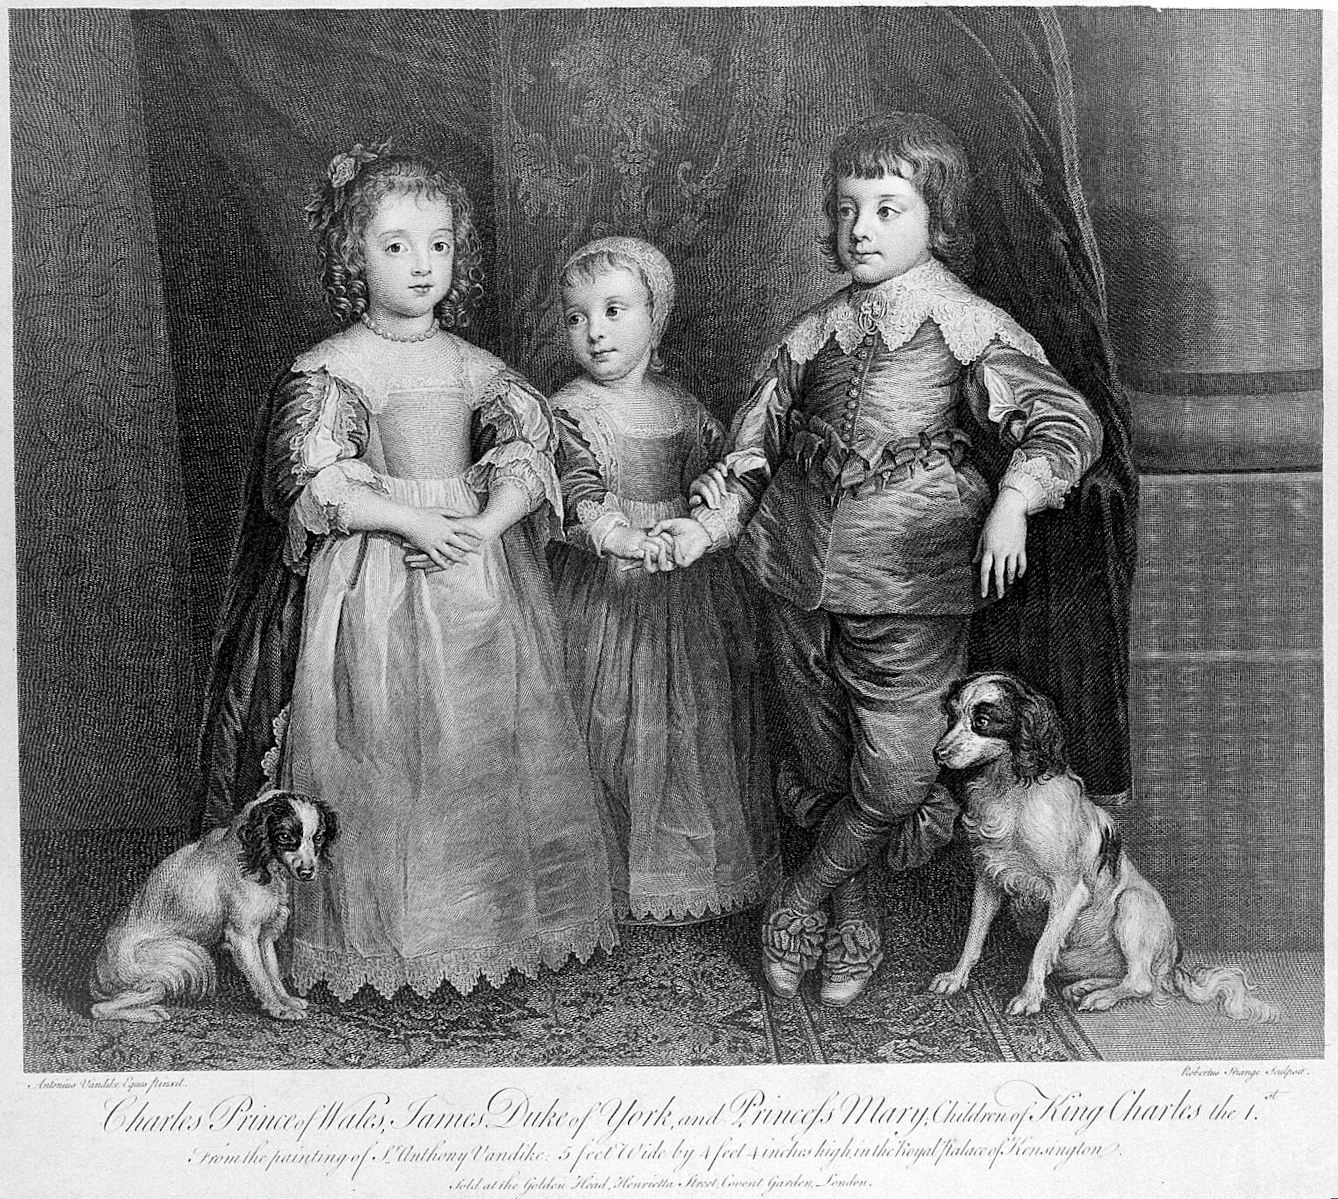 Black and white image of King Charles I's three young children. From left to right, the image shows Princess Mary, James II as Duke of York, and Charles II as Prince of Wales. There are two King Charles Spaniels next to the children.  